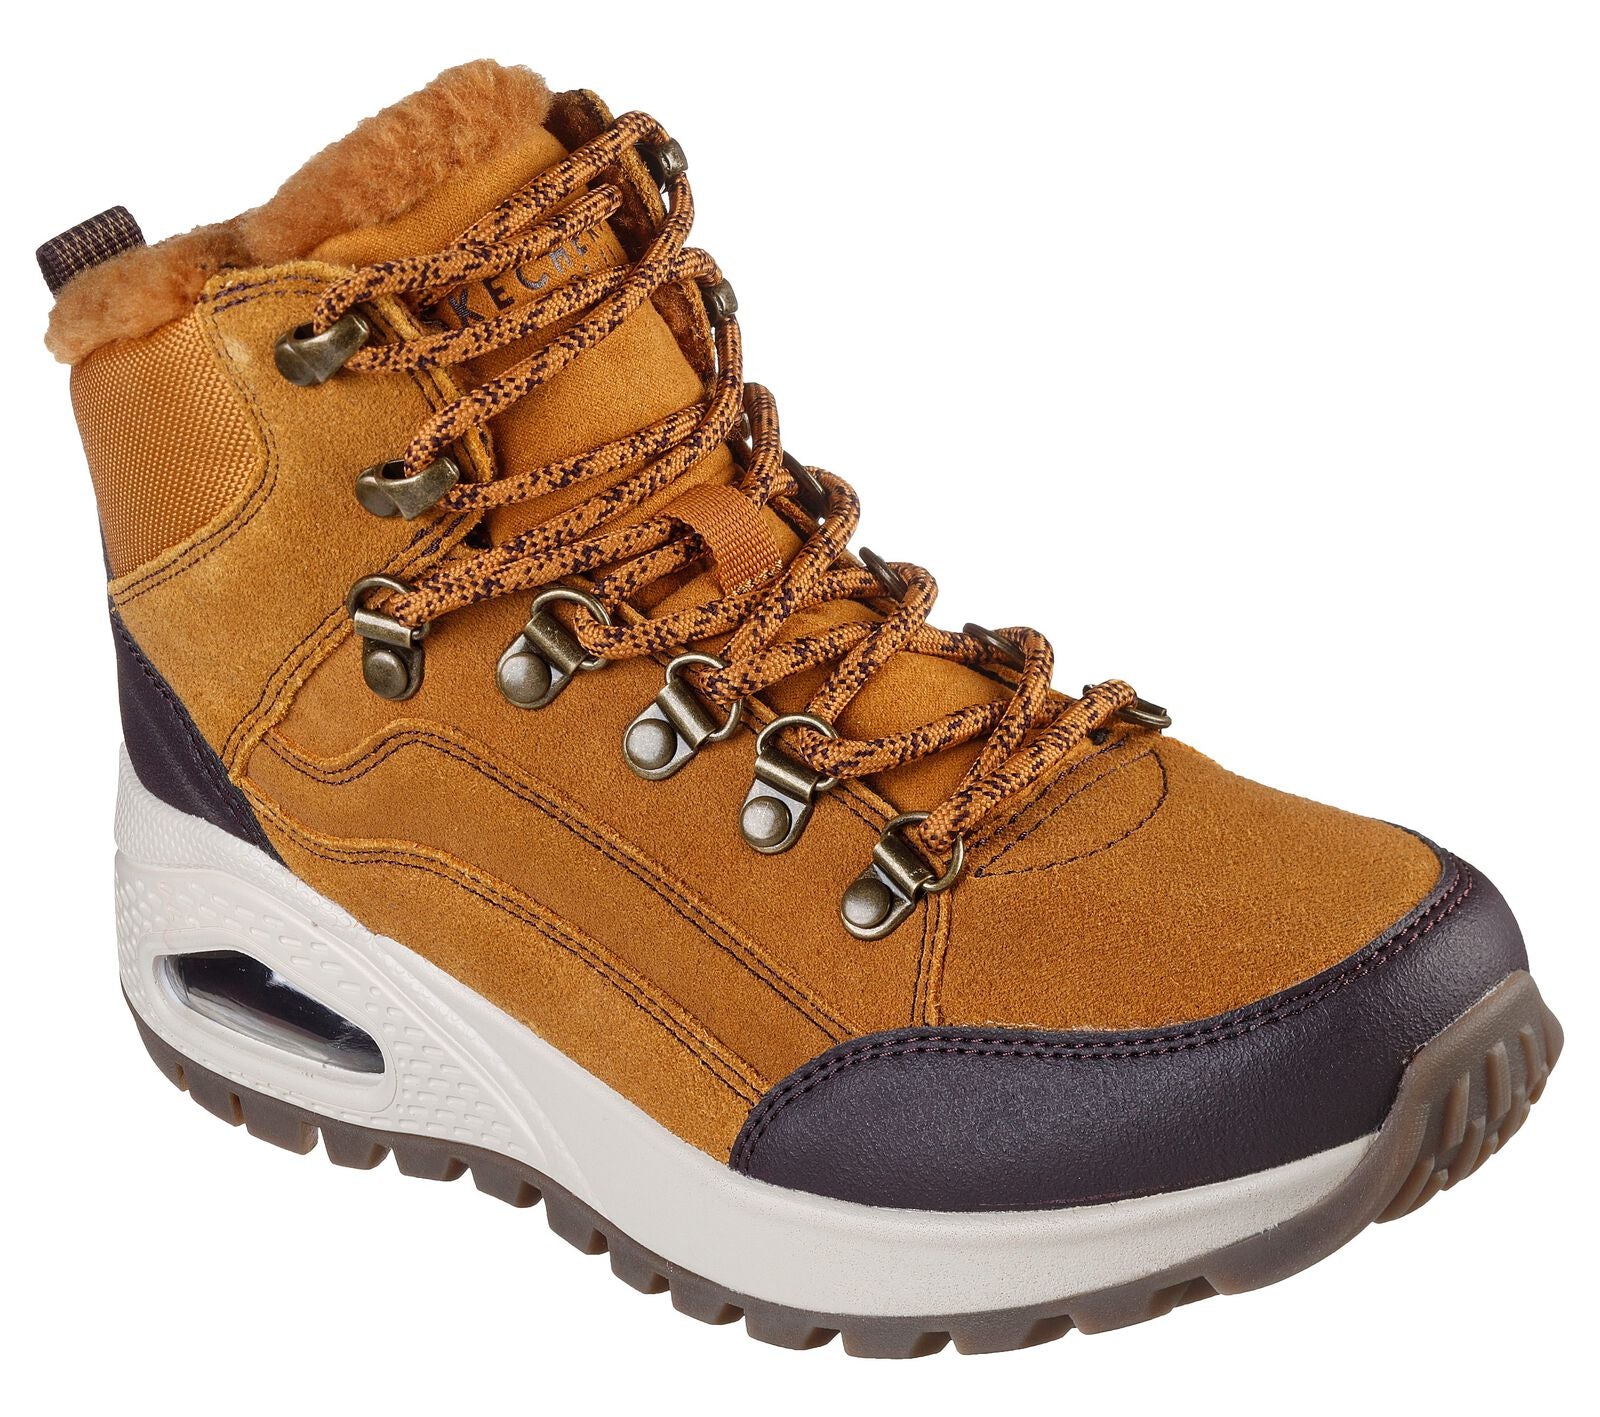 Skechers 155224 Winter Feels Ladies Wheat Suede Lace Up Ankle Boots